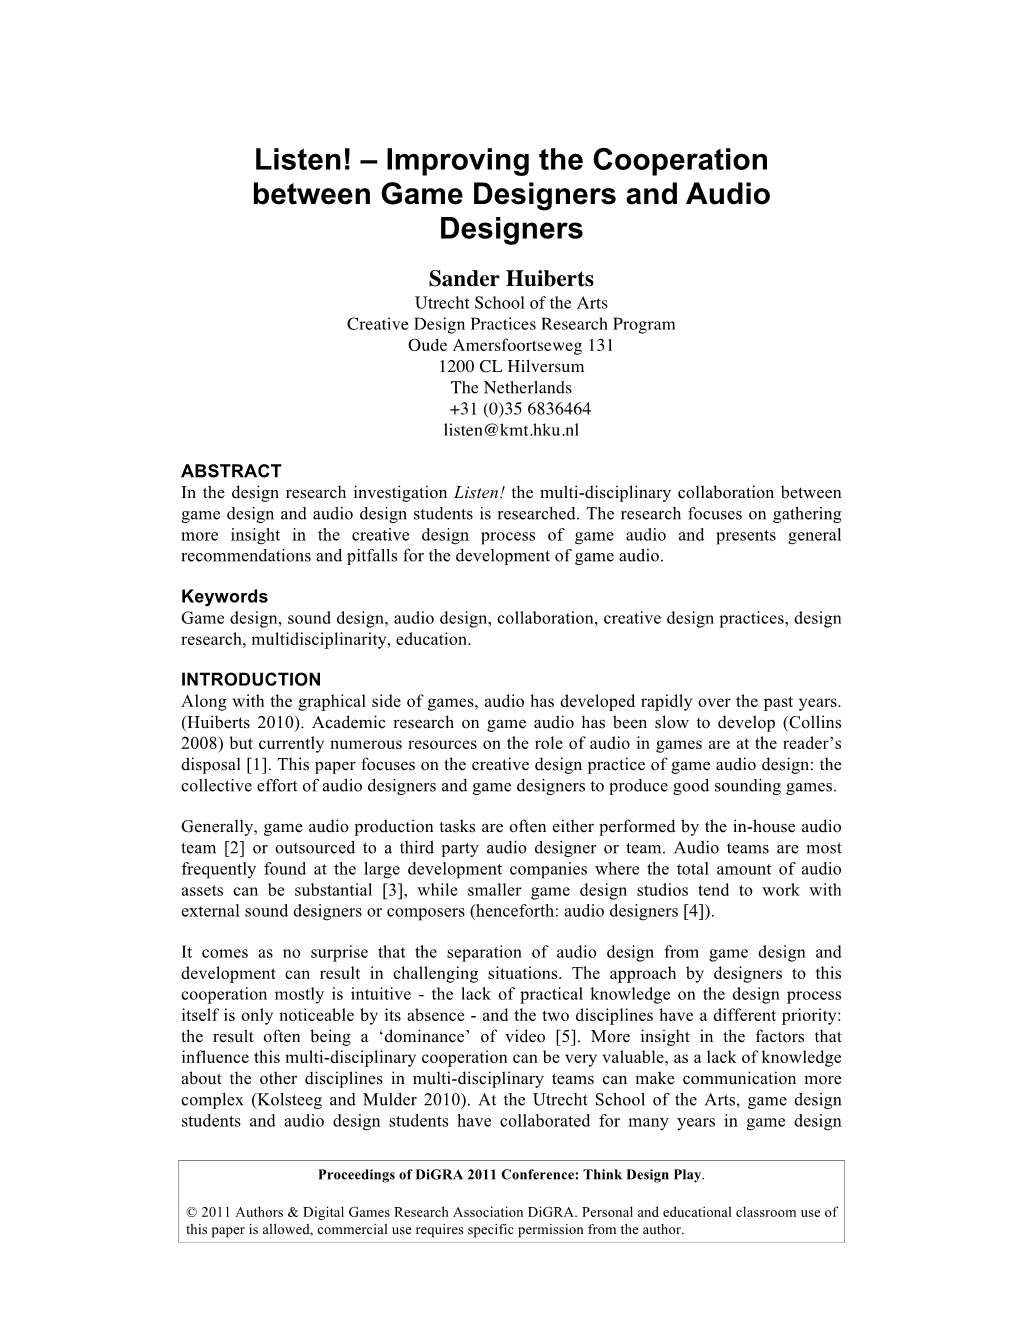 Improving the Cooperation Between Game Designers and Audio Designers